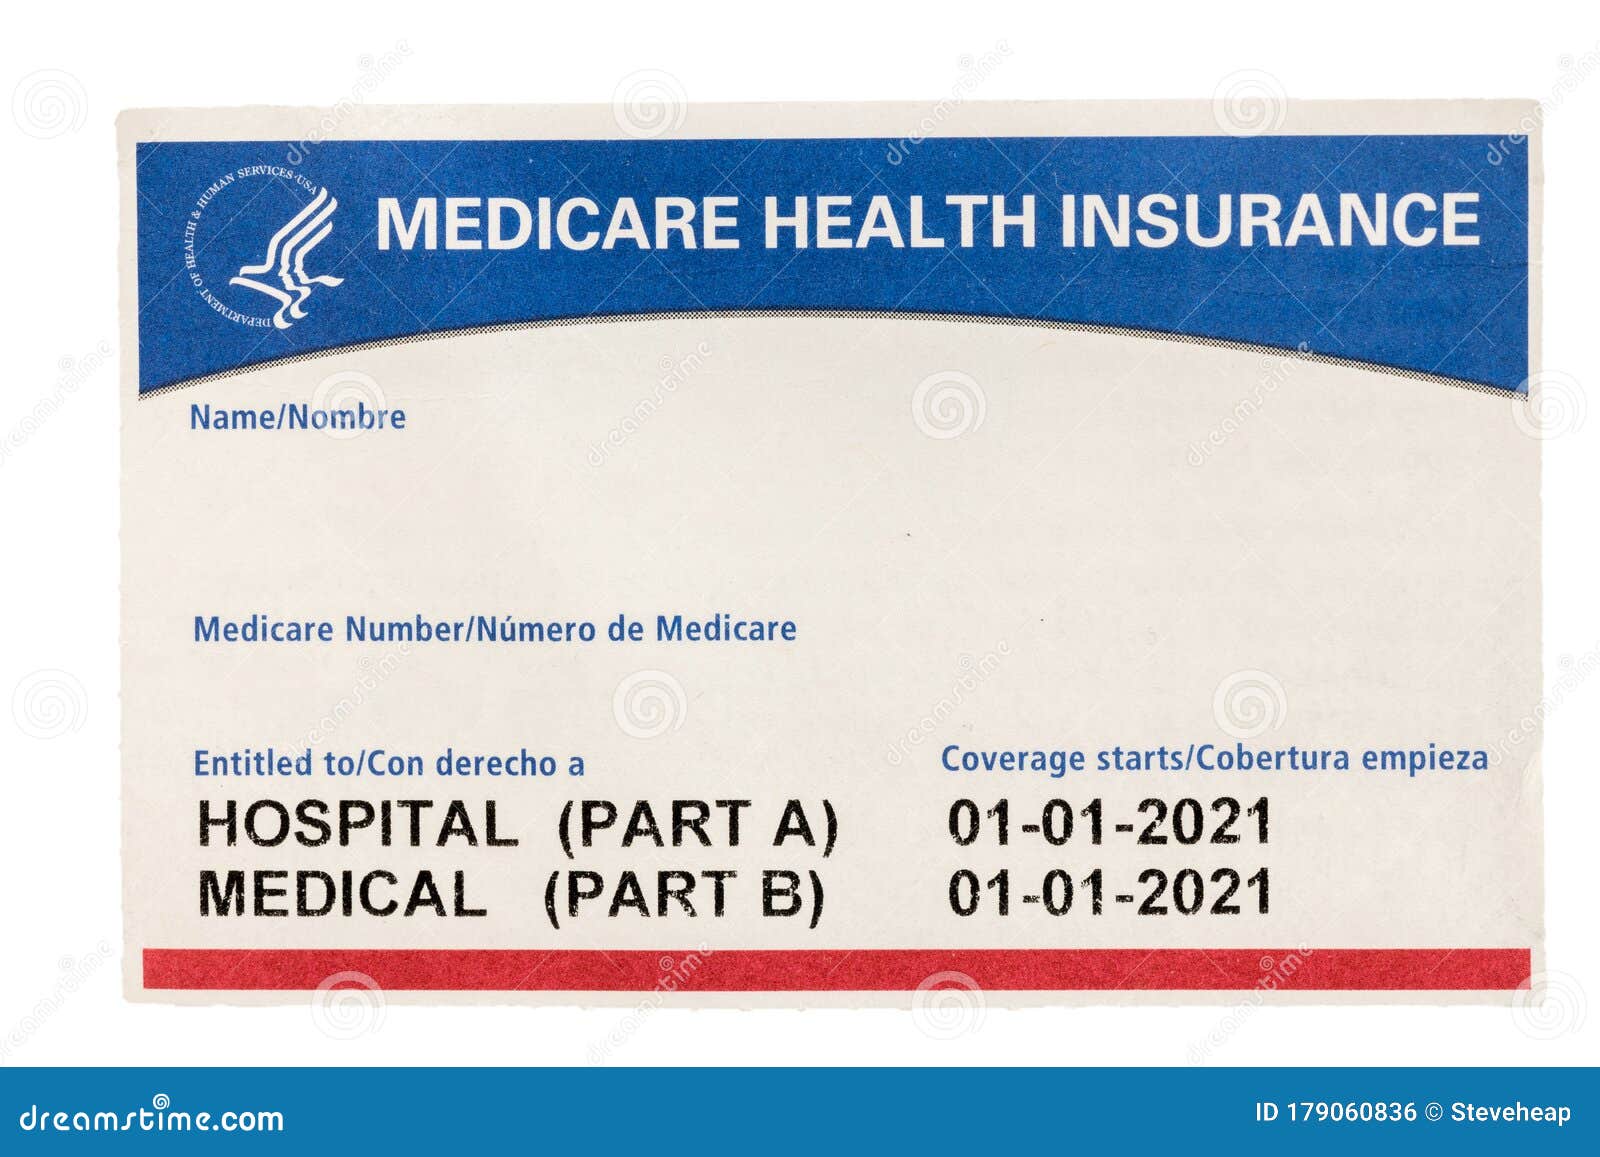 blank medical insurance card template 2,2 Blank Insurance Card Photos - Free & Royalty-Free Stock